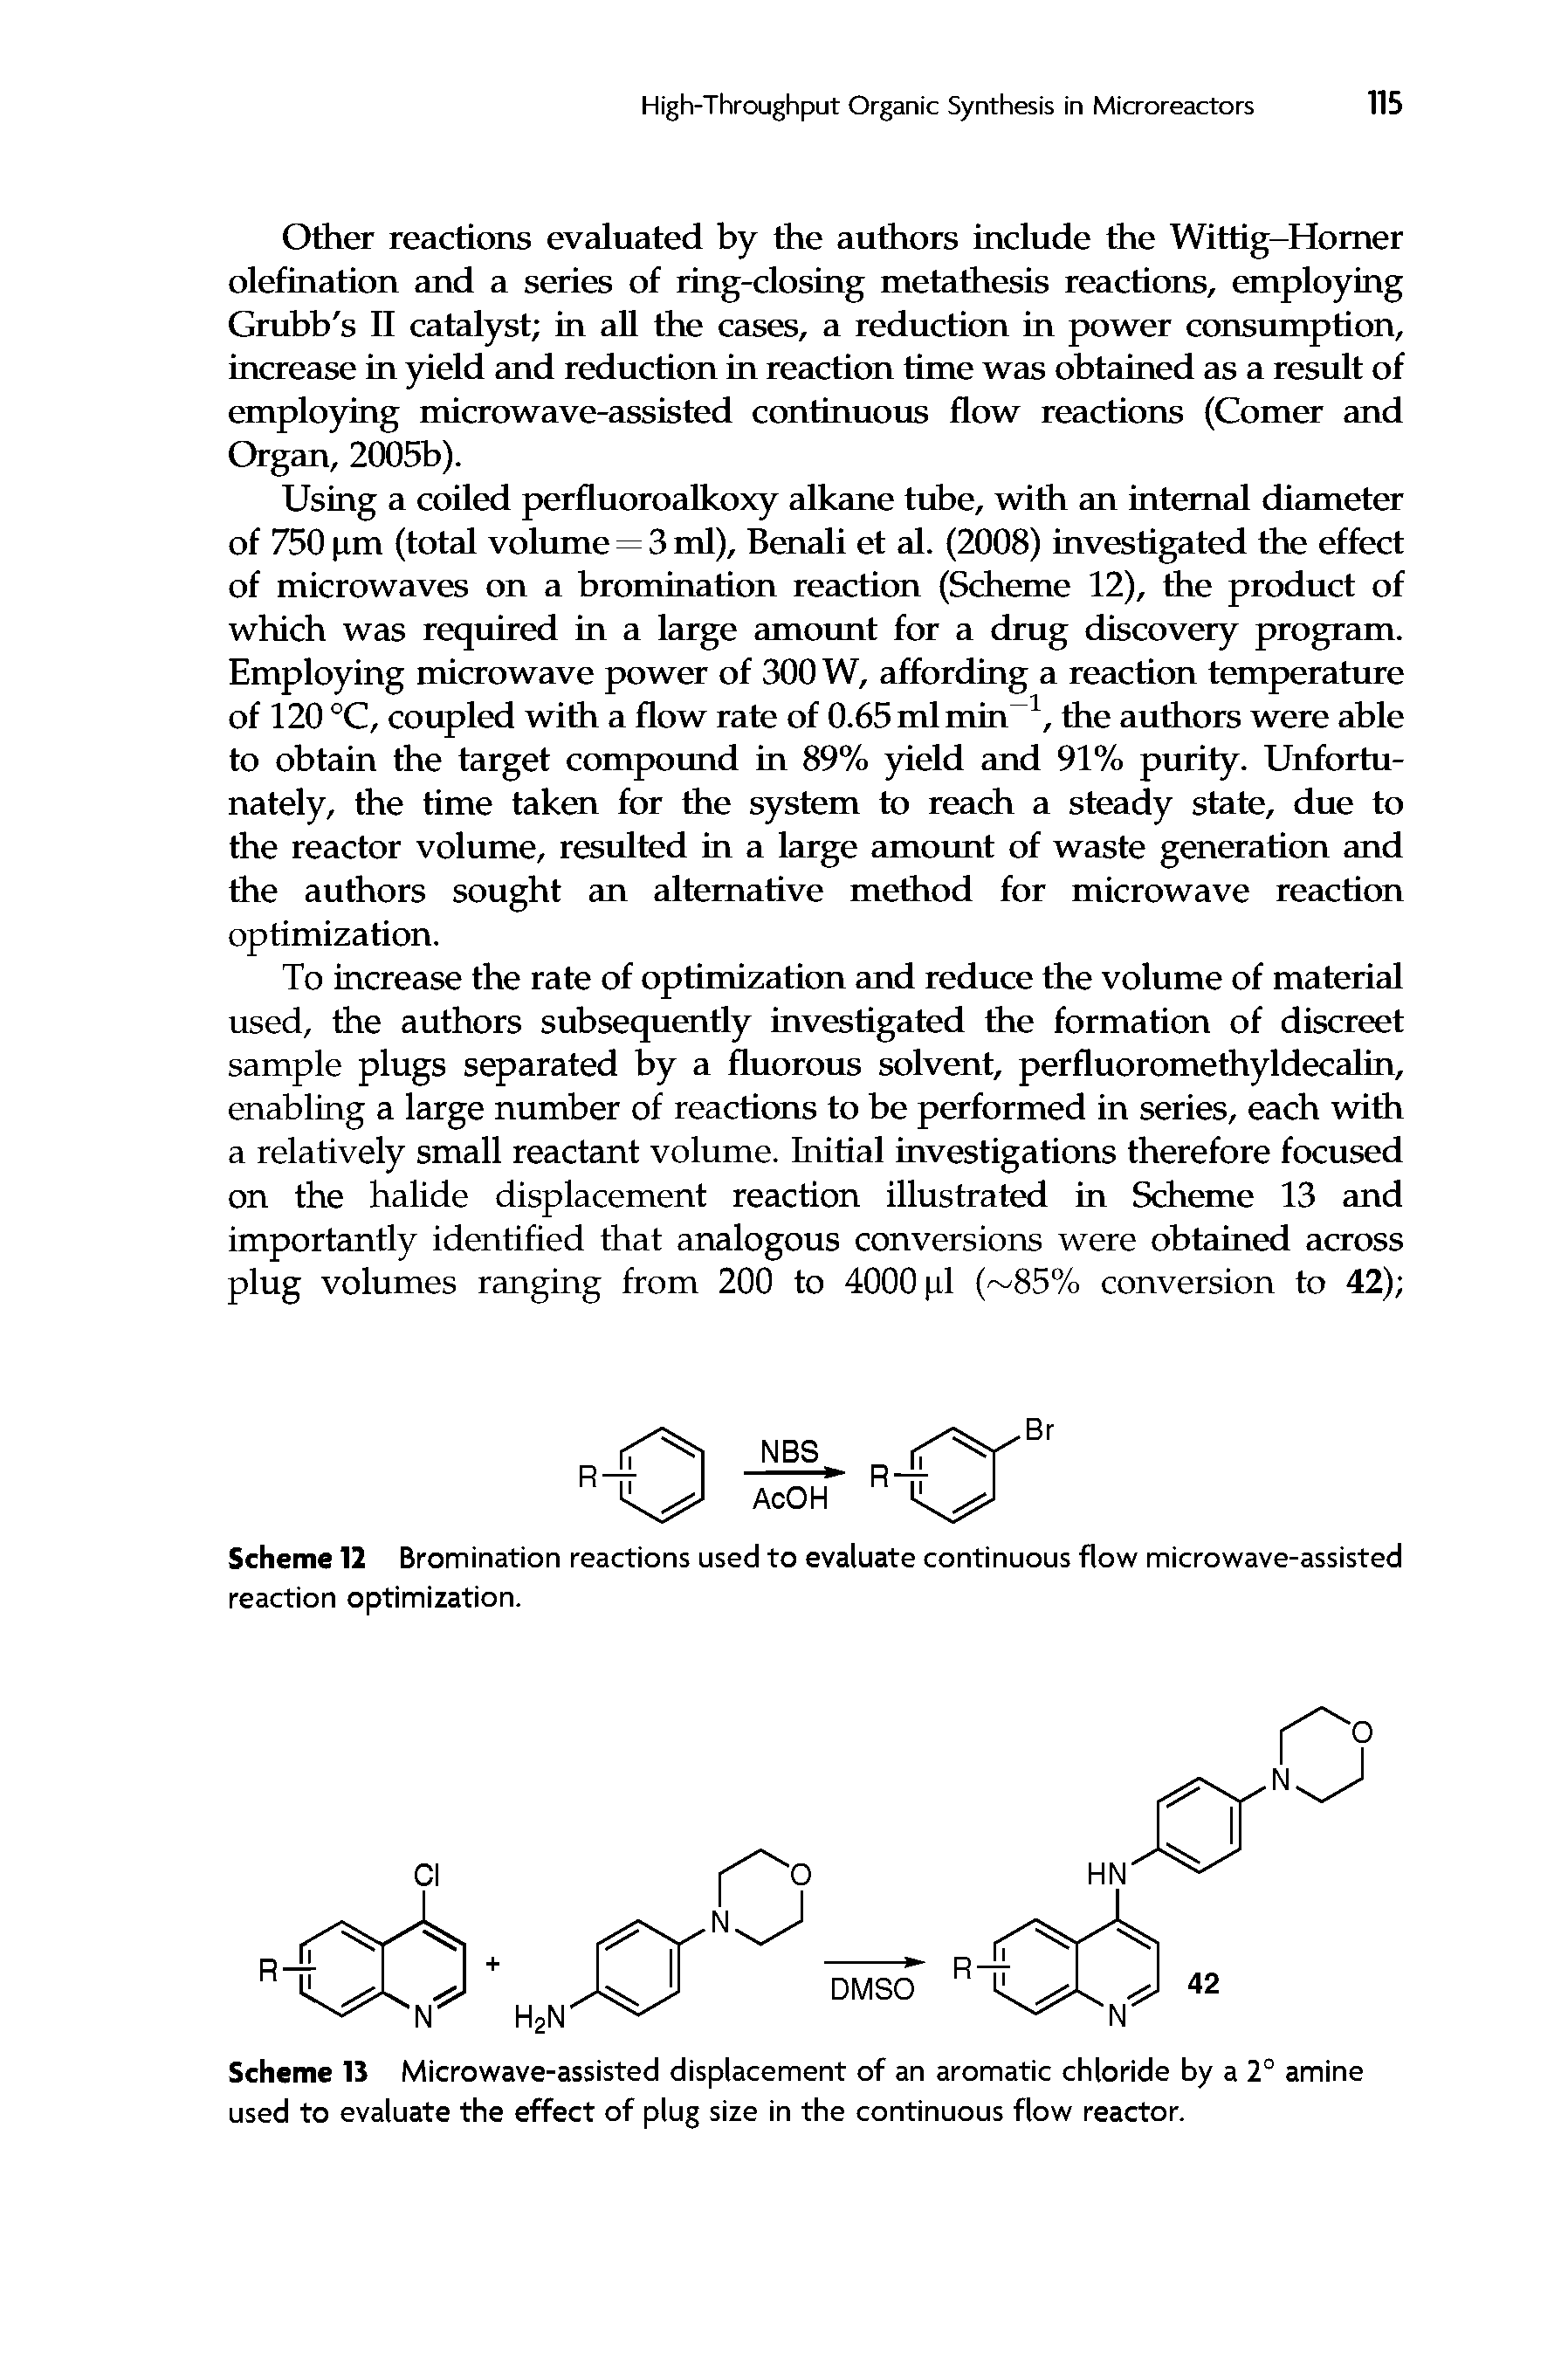 Scheme 13 Microwave-assisted displacement of an aromatic chloride by a 2° amine used to evaluate the effect of plug size in the continuous flow reactor.